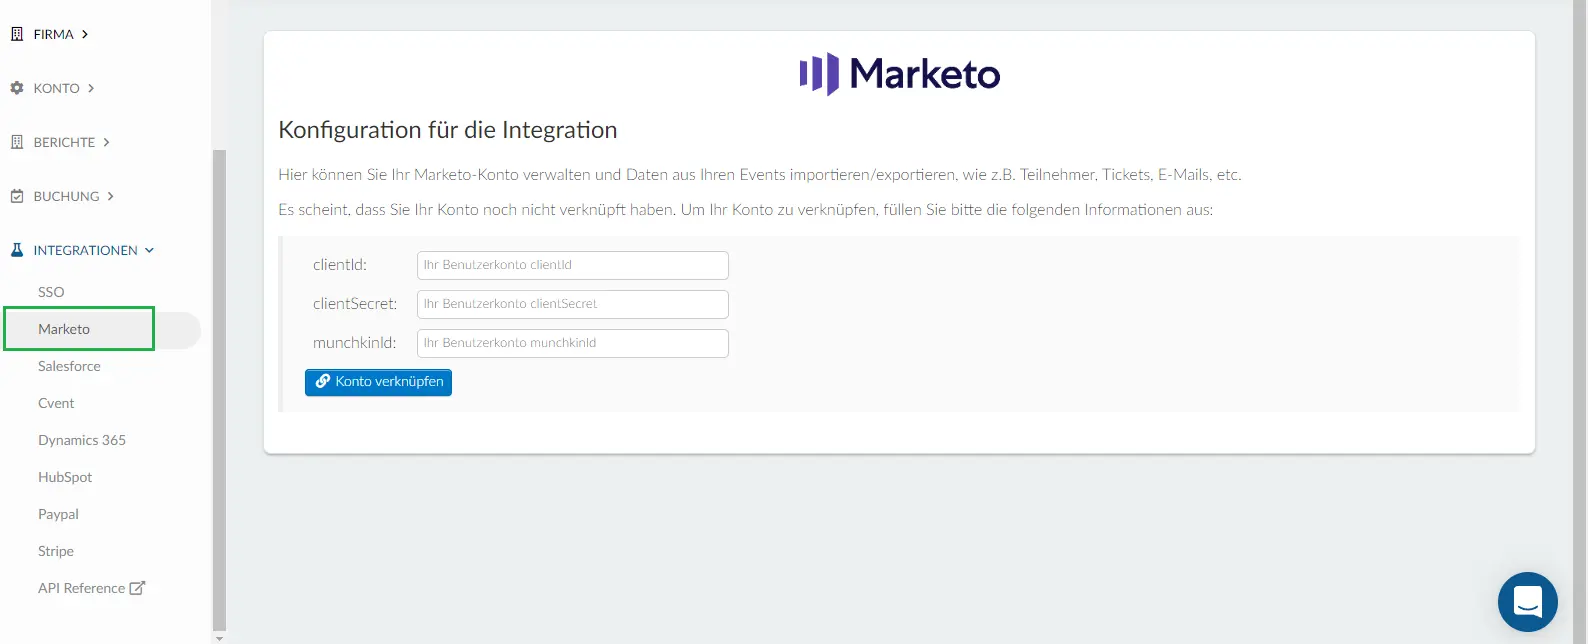 How to integrate the platform with Marketo